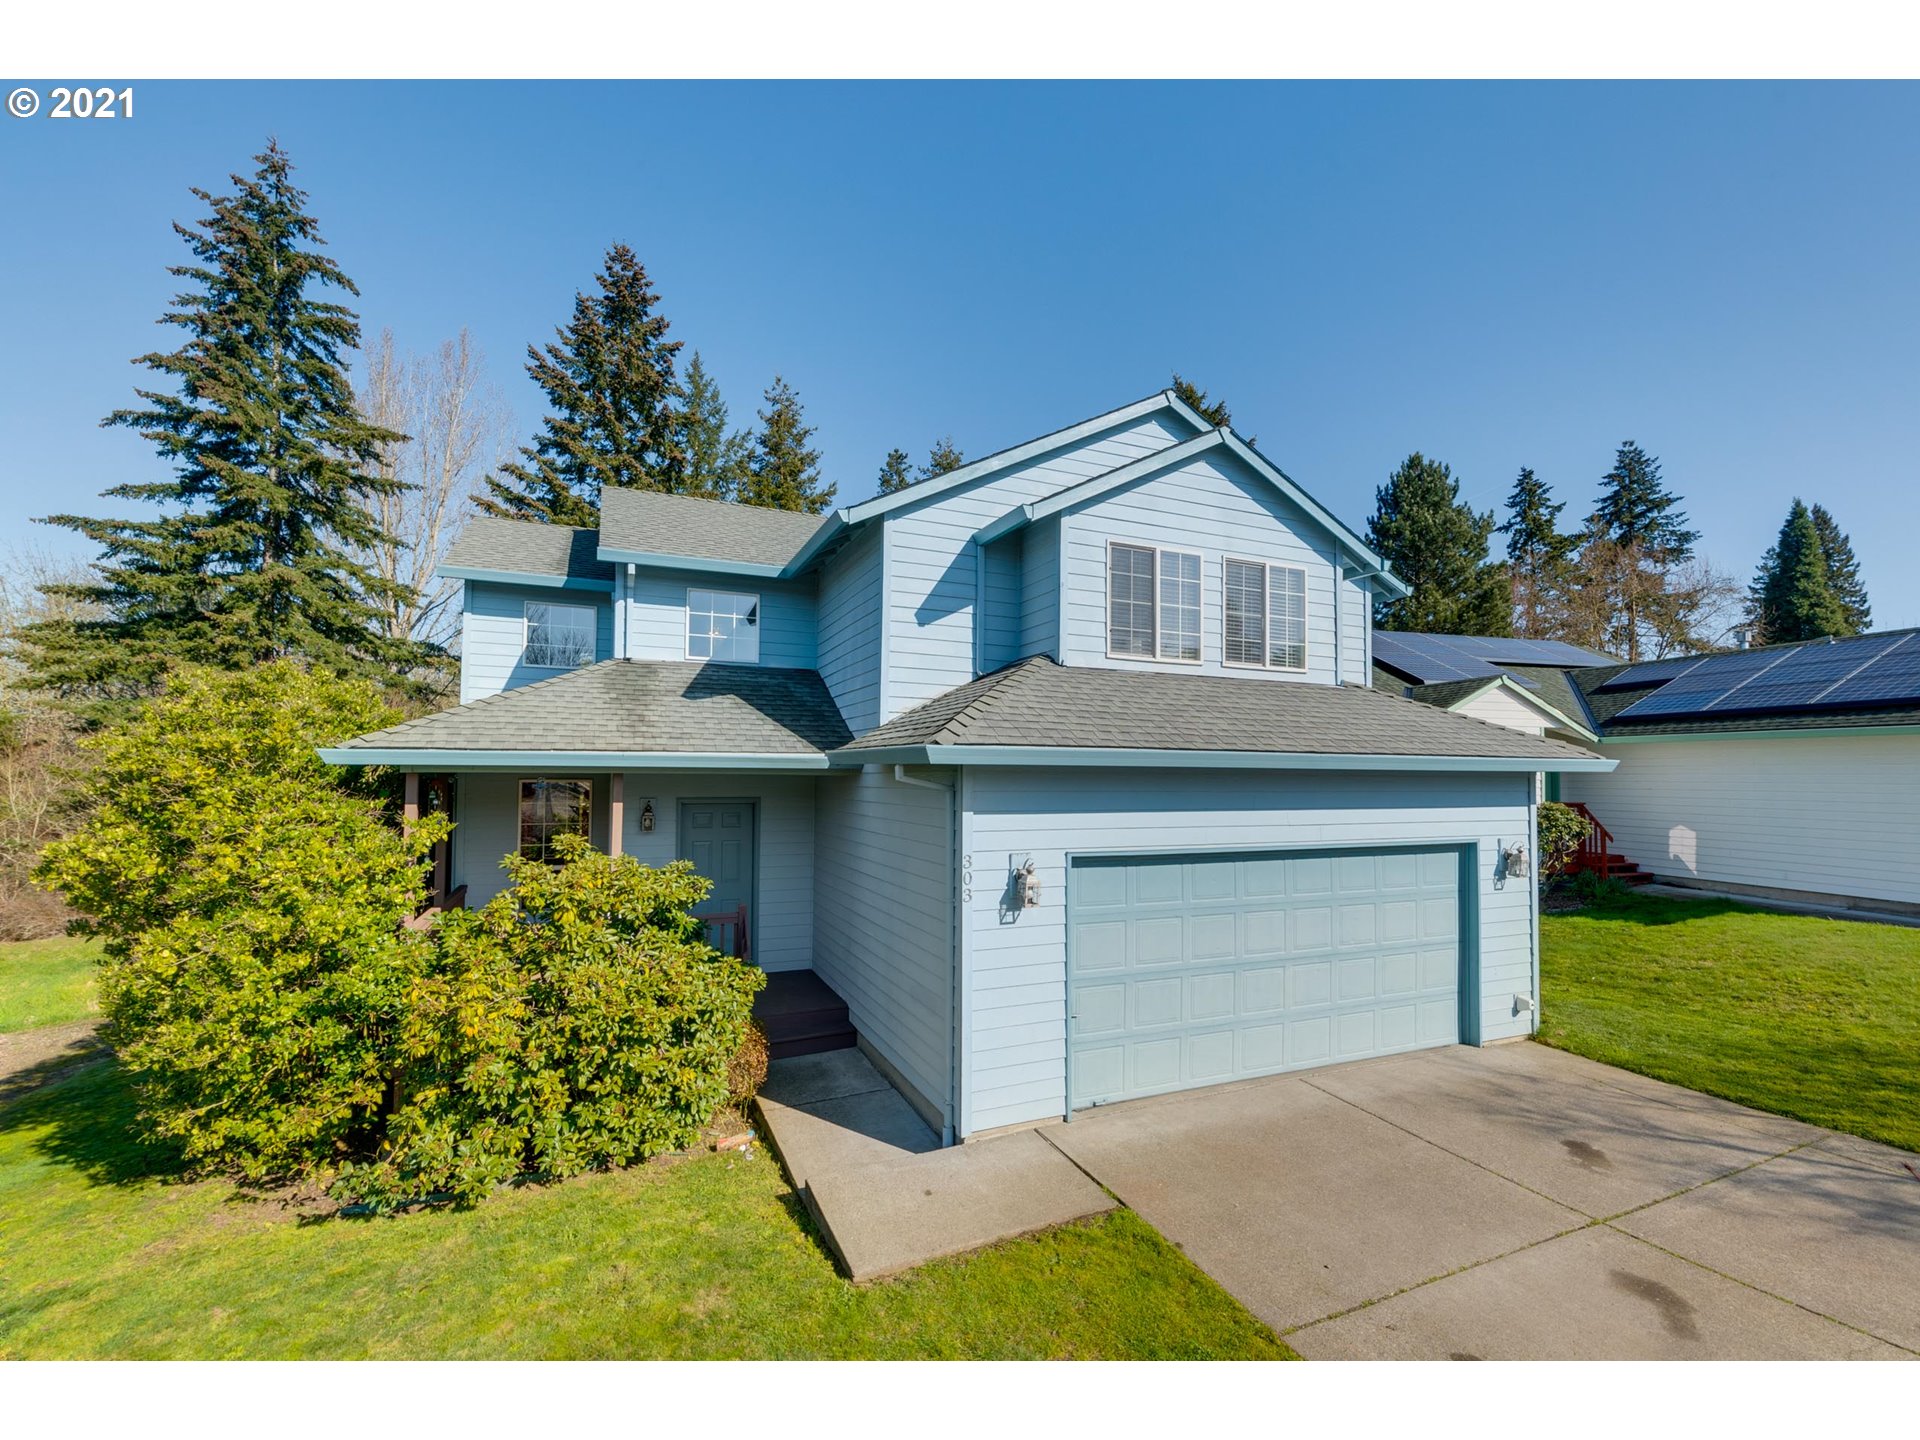 303 SE 68TH AVE (1 of 30)